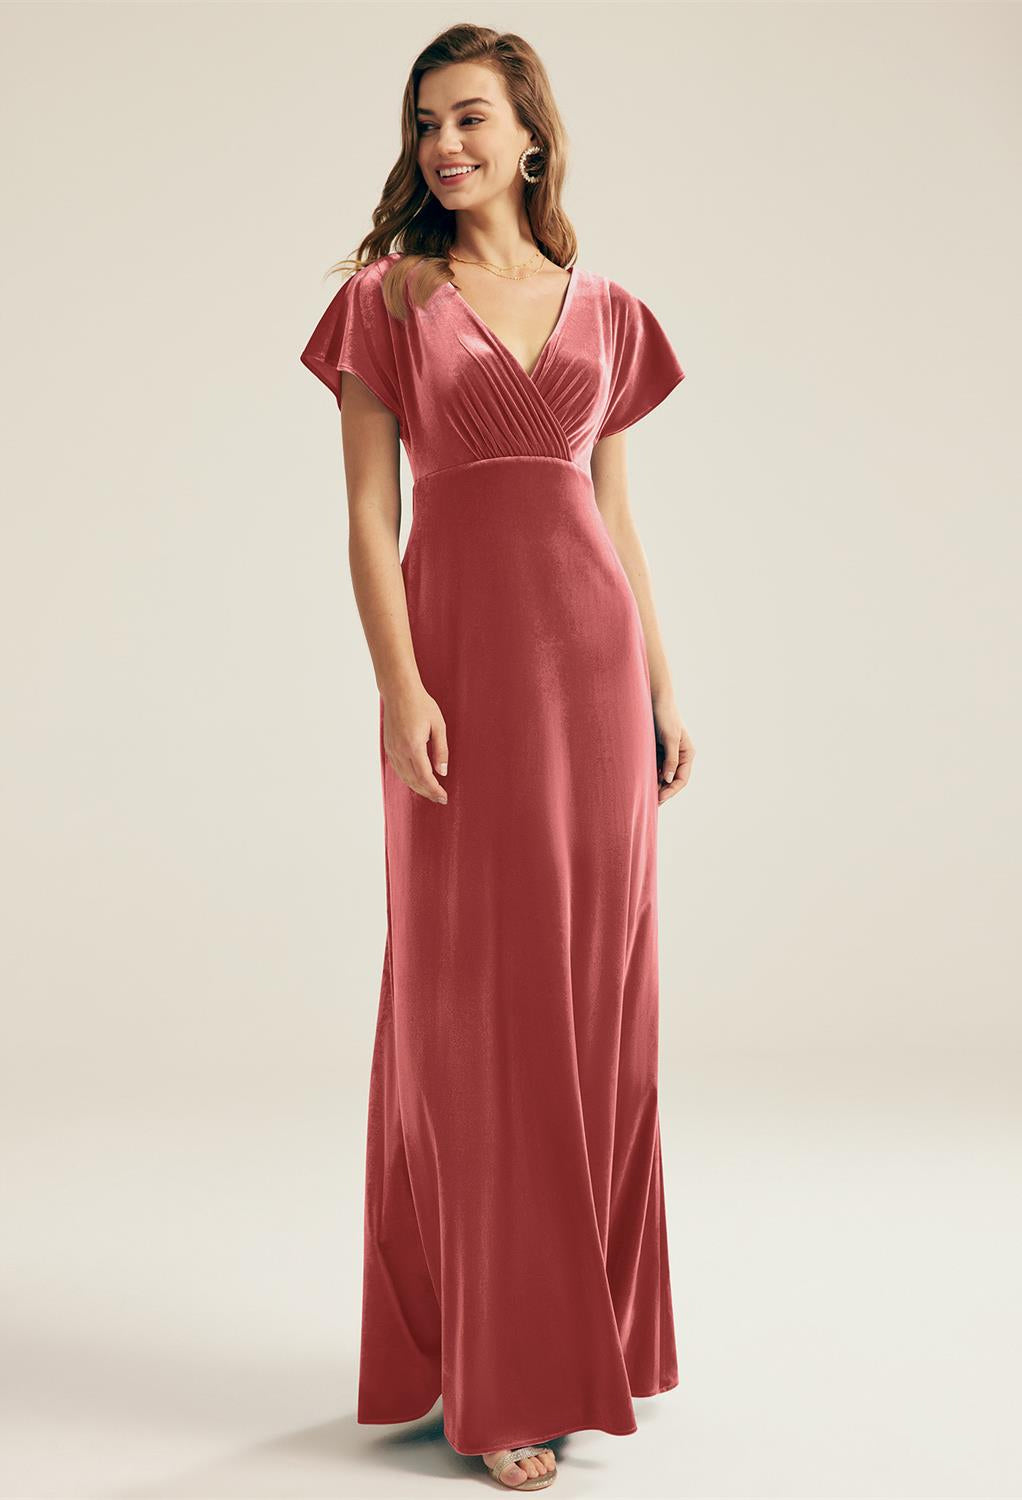 A woman wearing a Meara - Velvet Bridesmaid Dress - Off The Rack found at Bergamot Bridal in London.